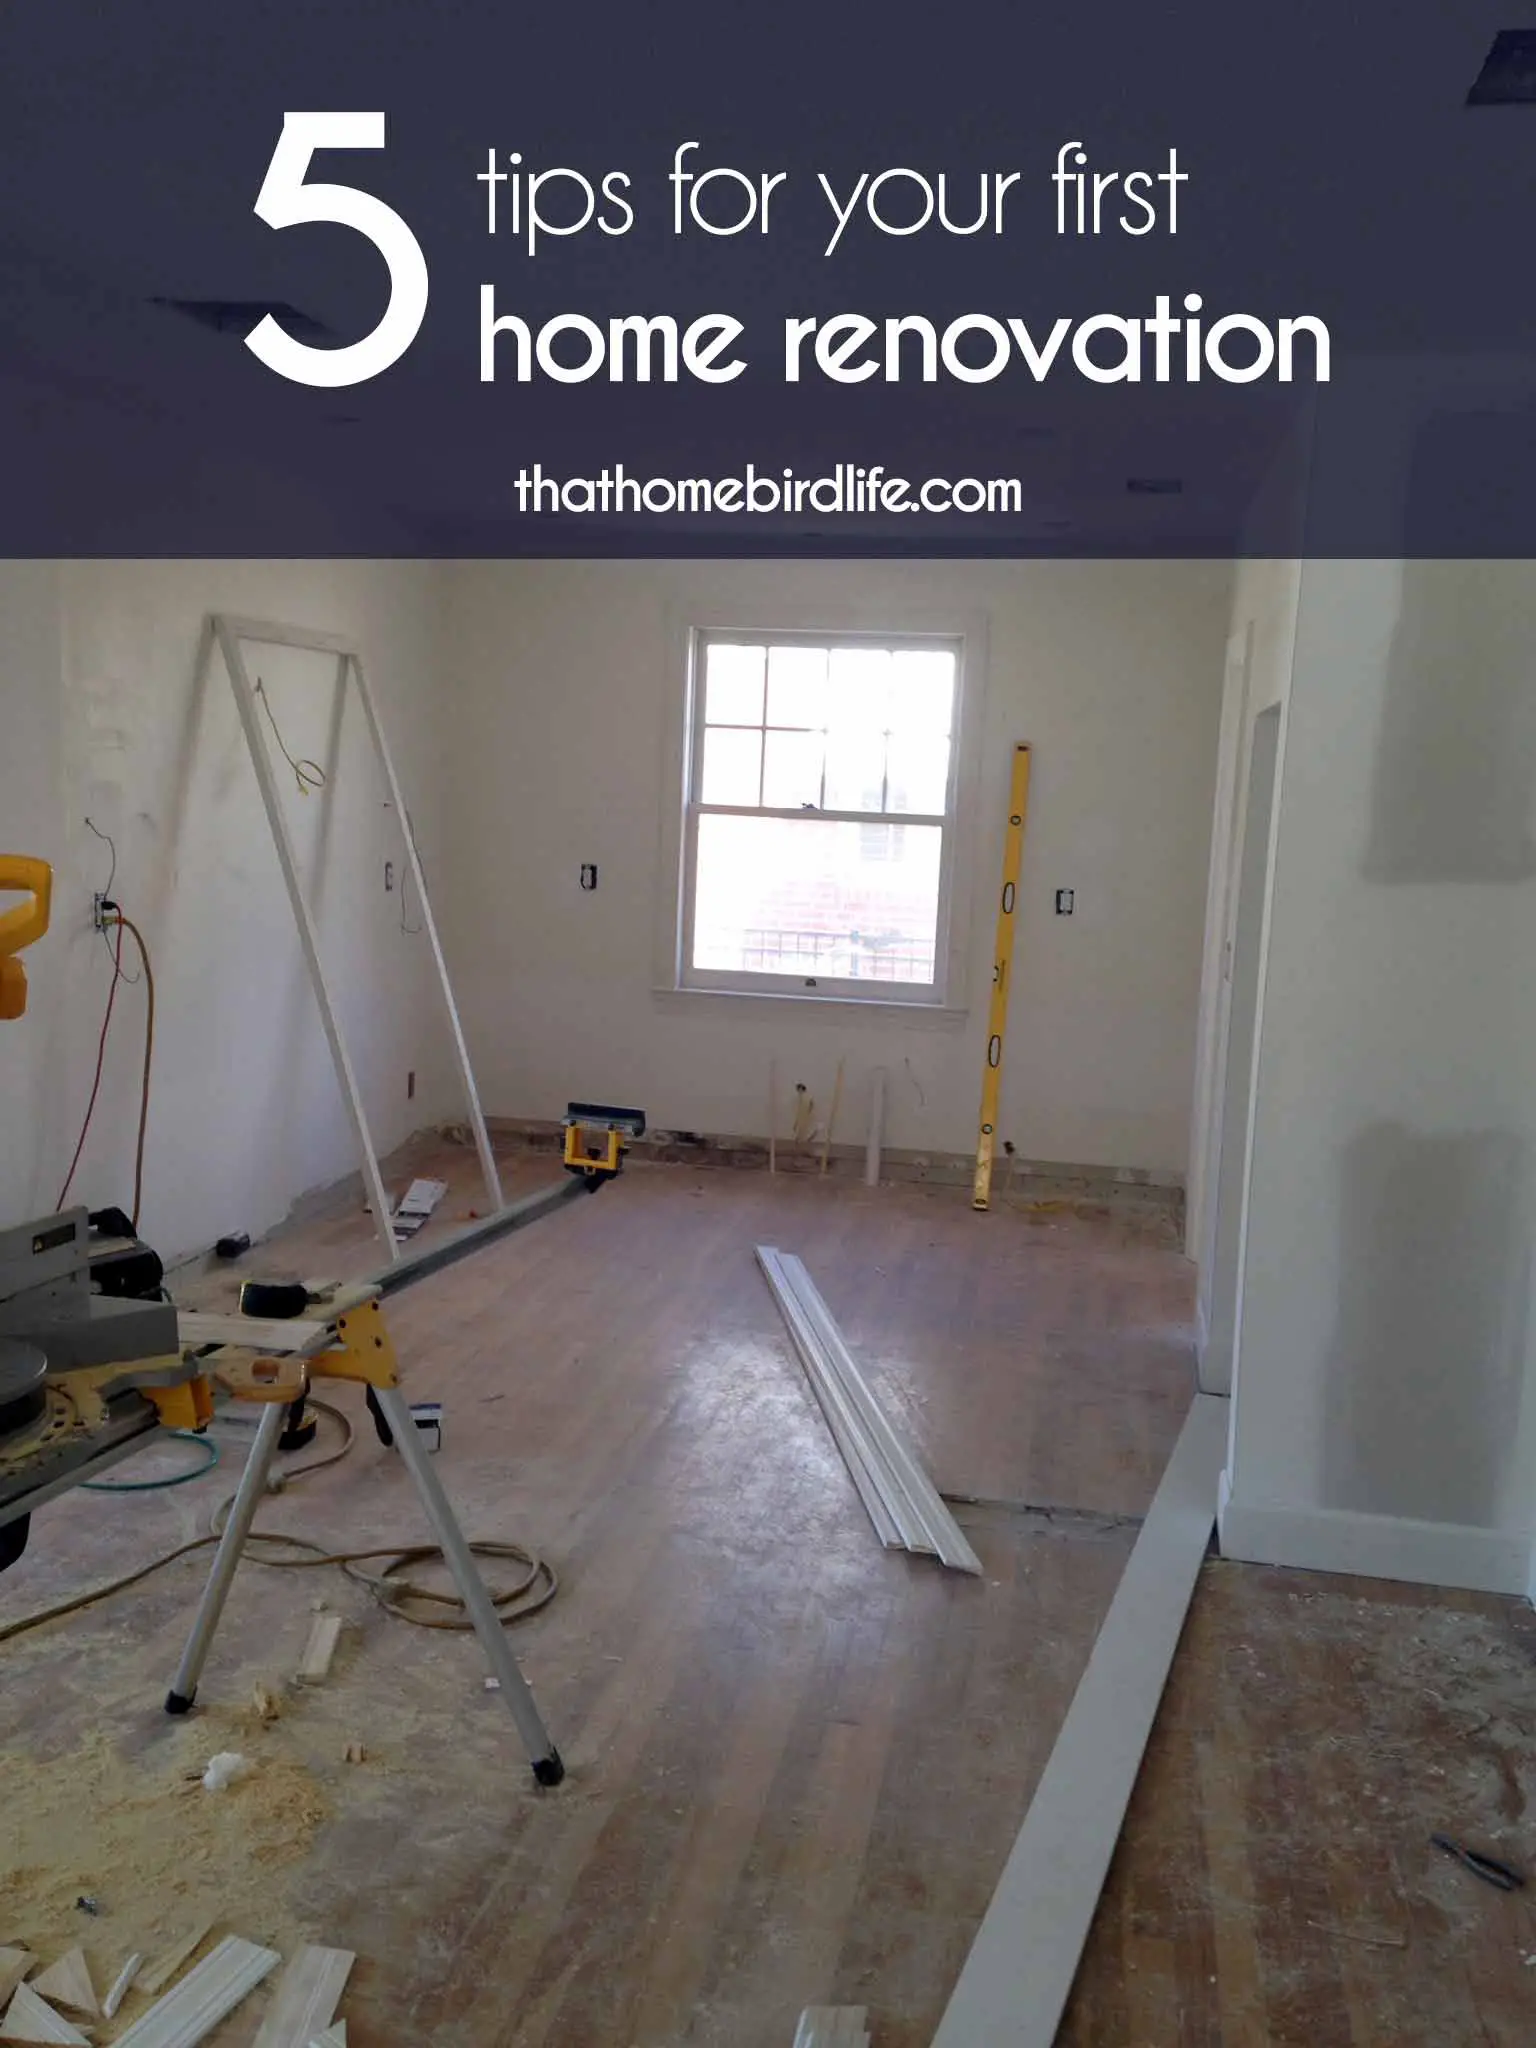 Everyone's renovation experience will look slightly different, depending on the extent of work, personal DIY skills, budget and location. Here are 5 tips for your first home renovation that I think apply to most projects, big or small.